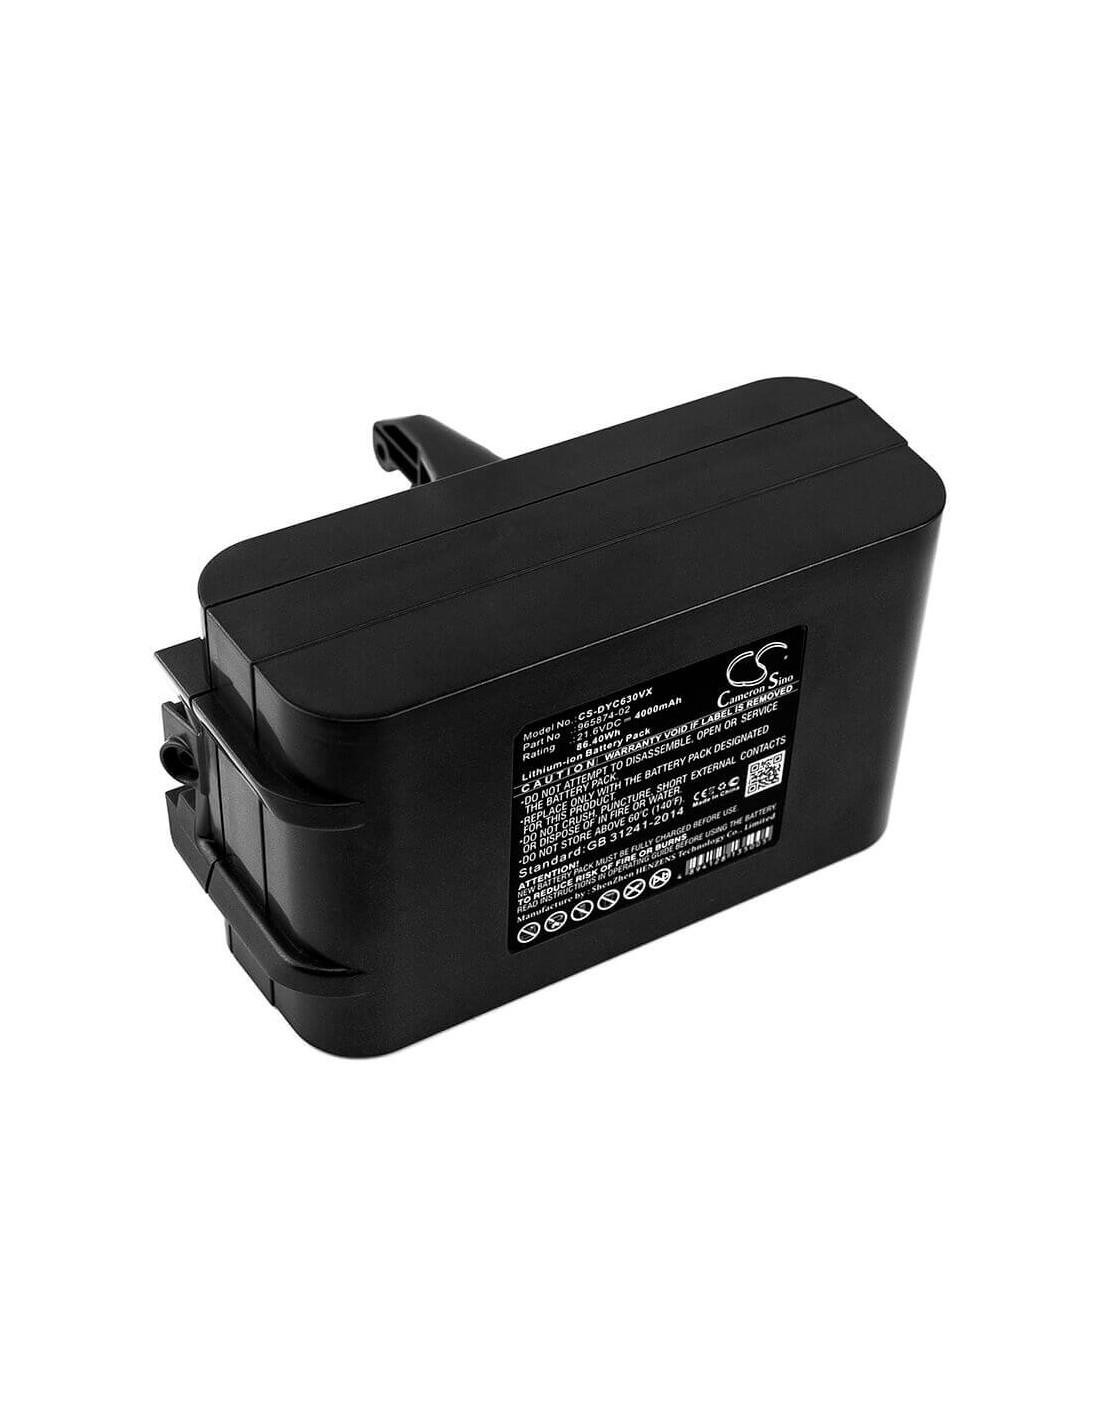 Dyson, Absolute, Dc58, Dc59 replacement battery